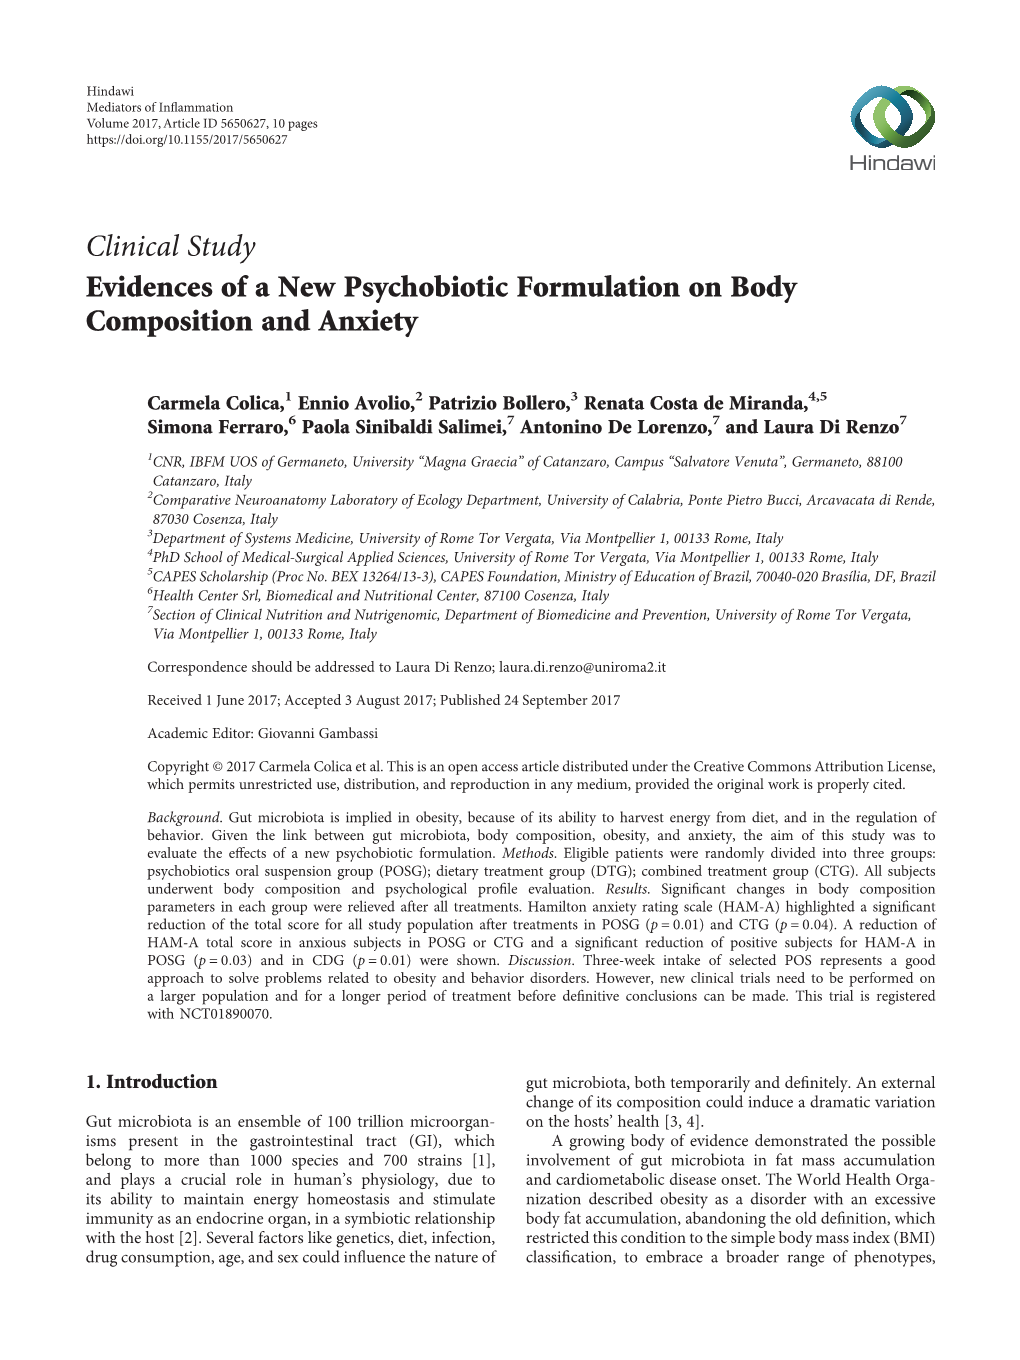 Clinical Study Evidences of a New Psychobiotic Formulation on Body Composition and Anxiety